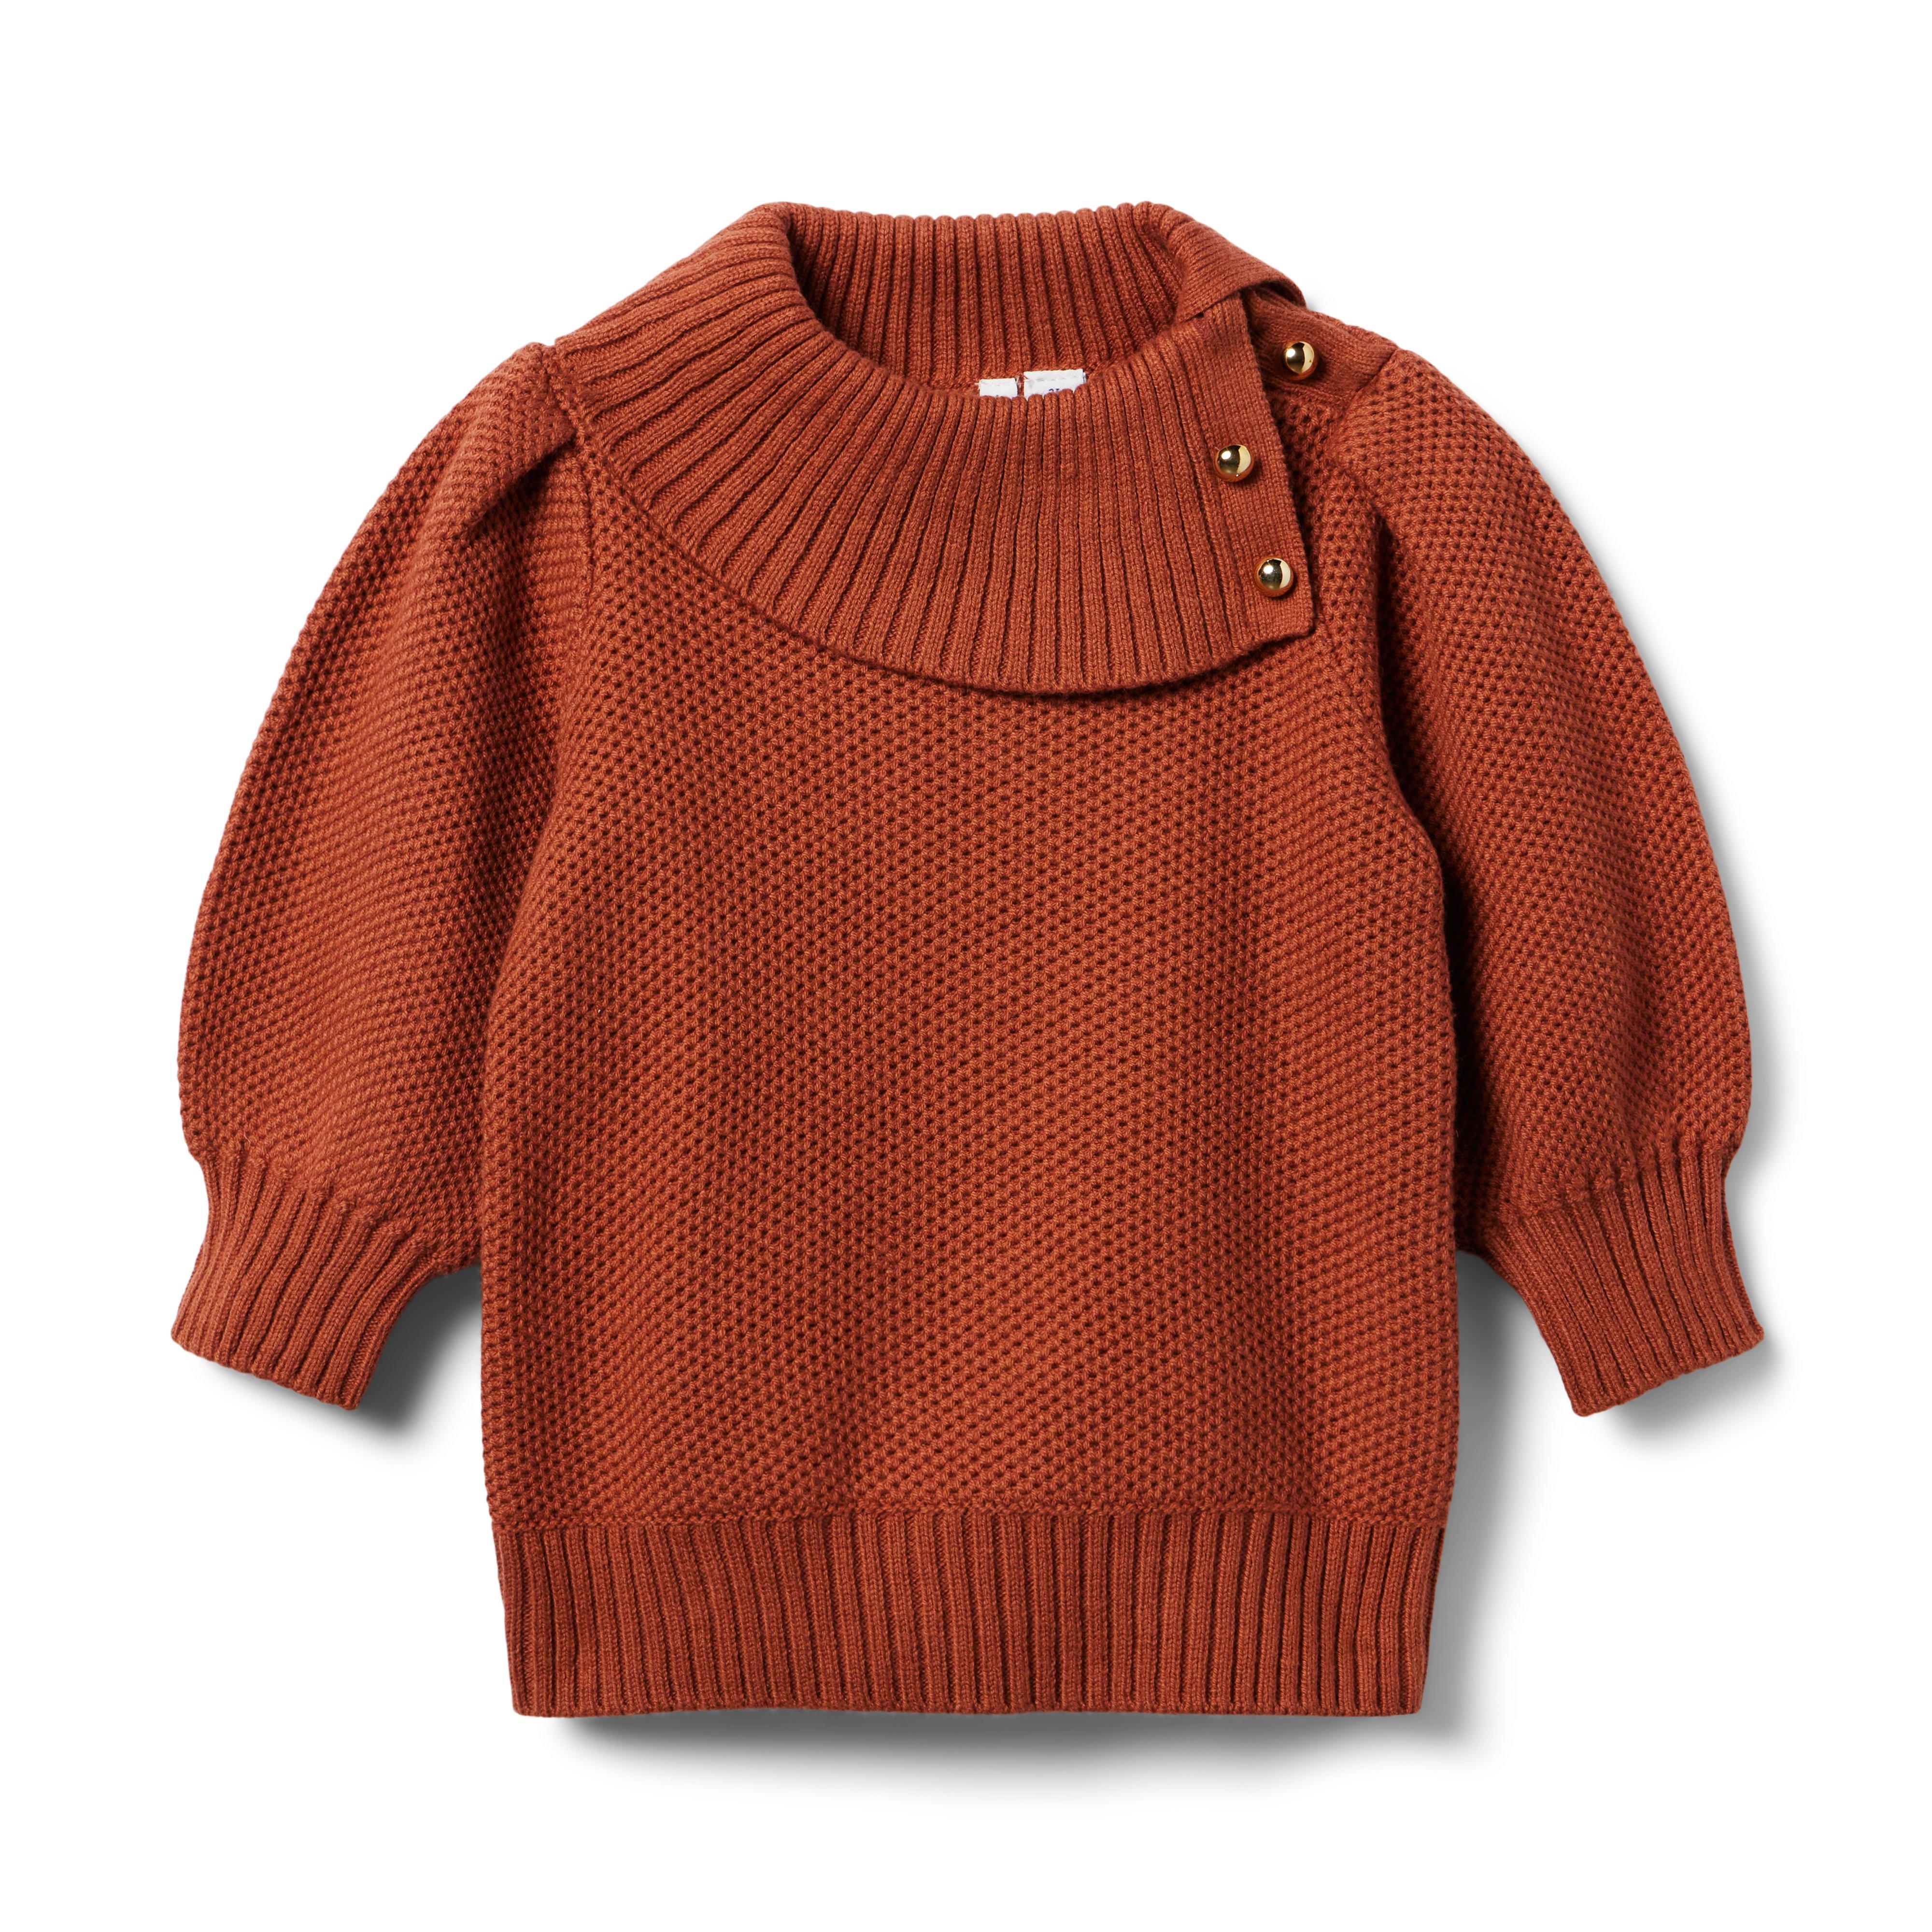 The East Side Sweater